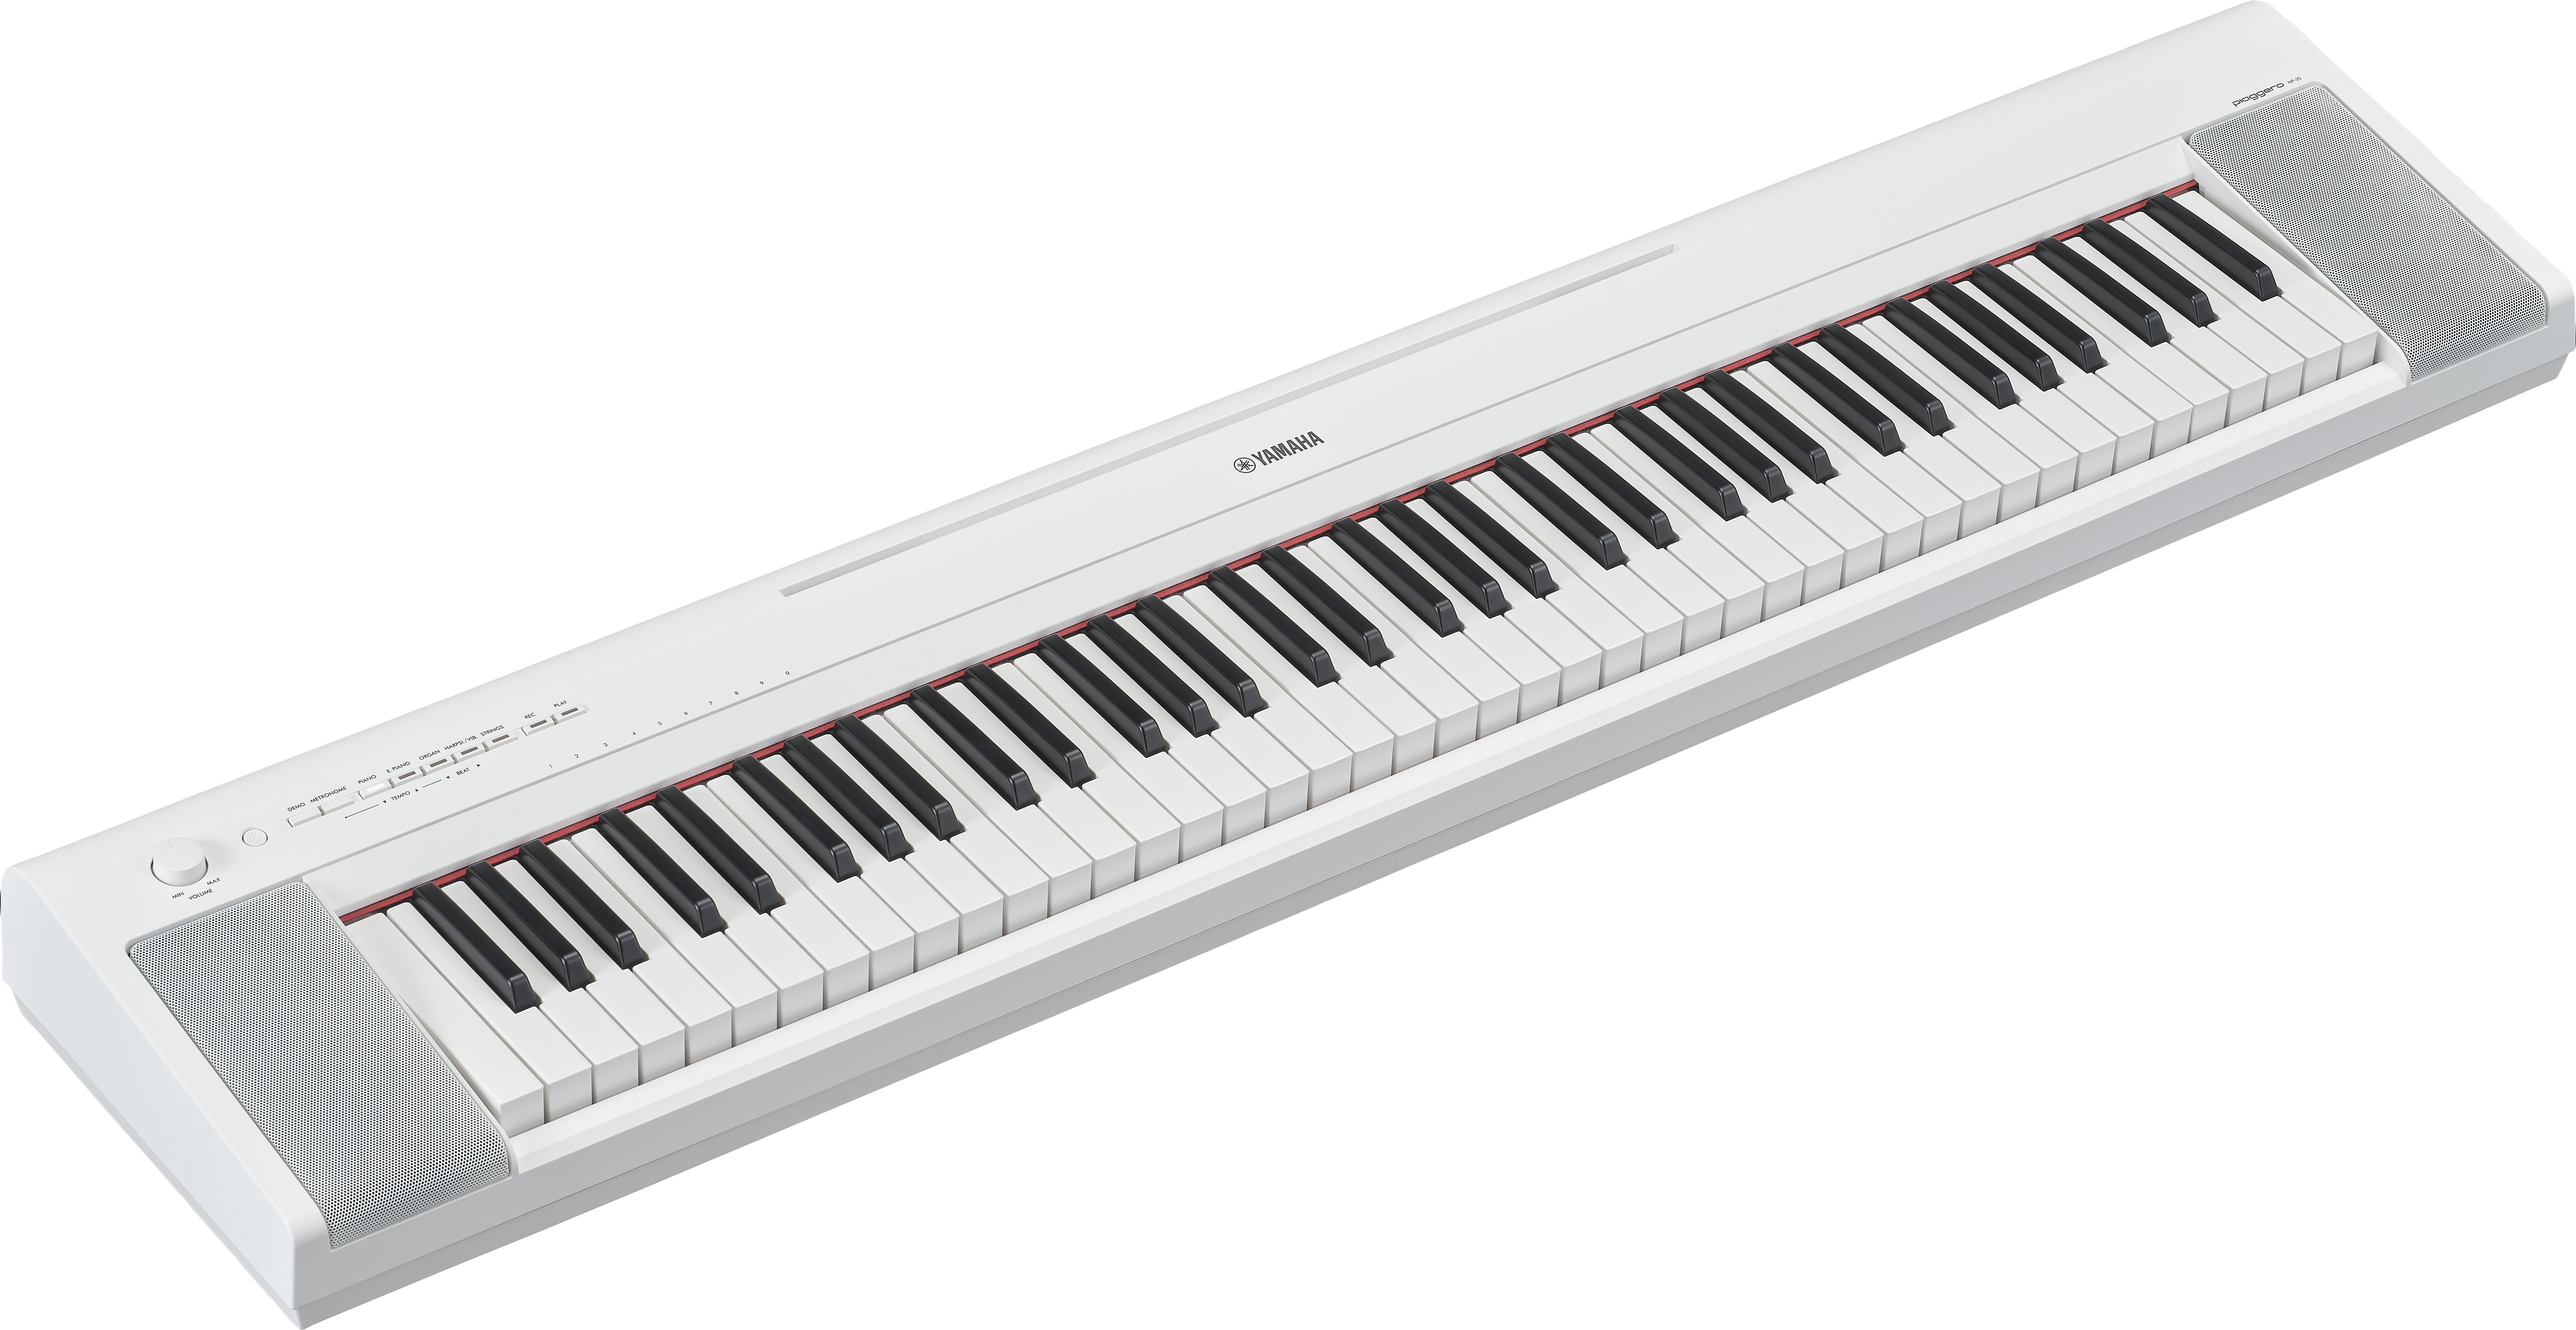 Yamaha NP35 76 key Portable Digital Piano in White -  NP35WH